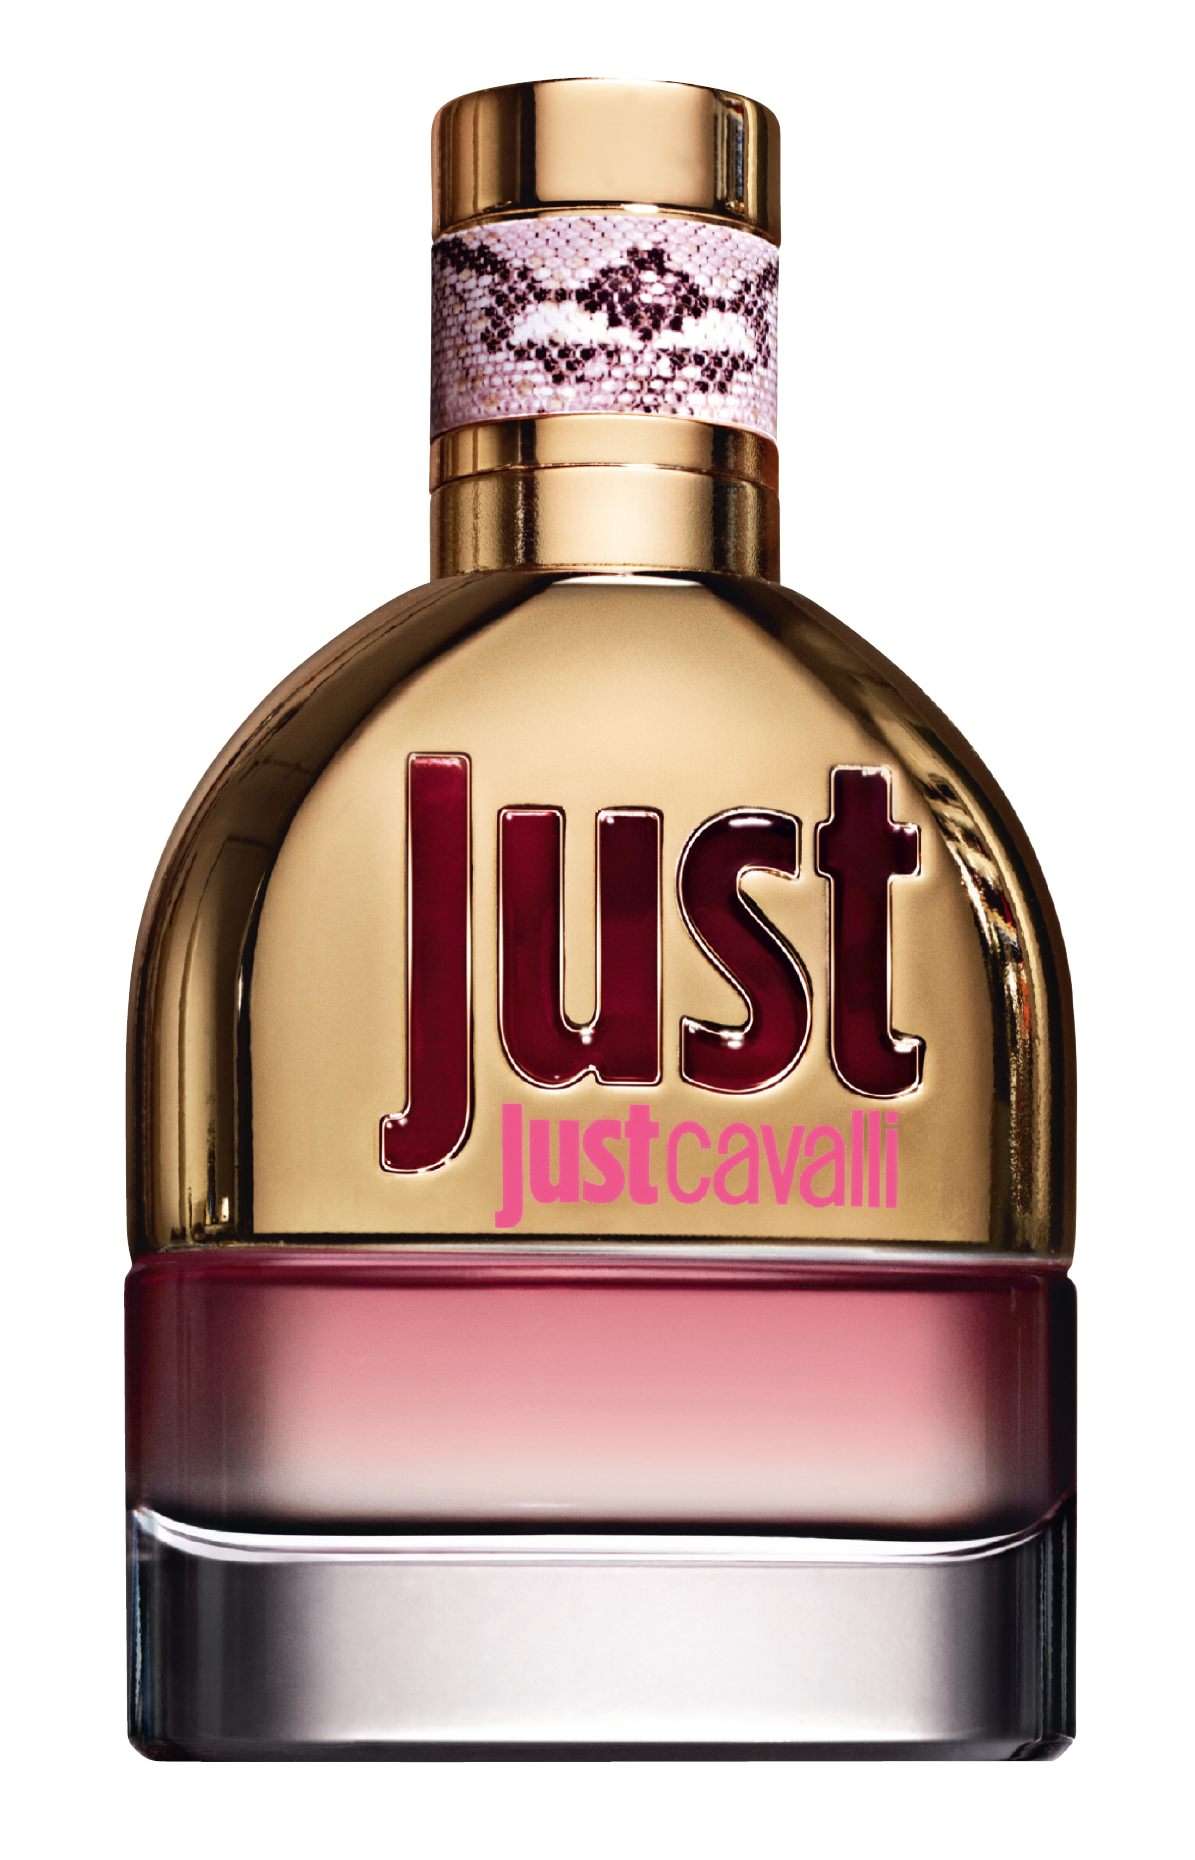 Just Cavalli_High Res_Bottle on White (10pX8p)